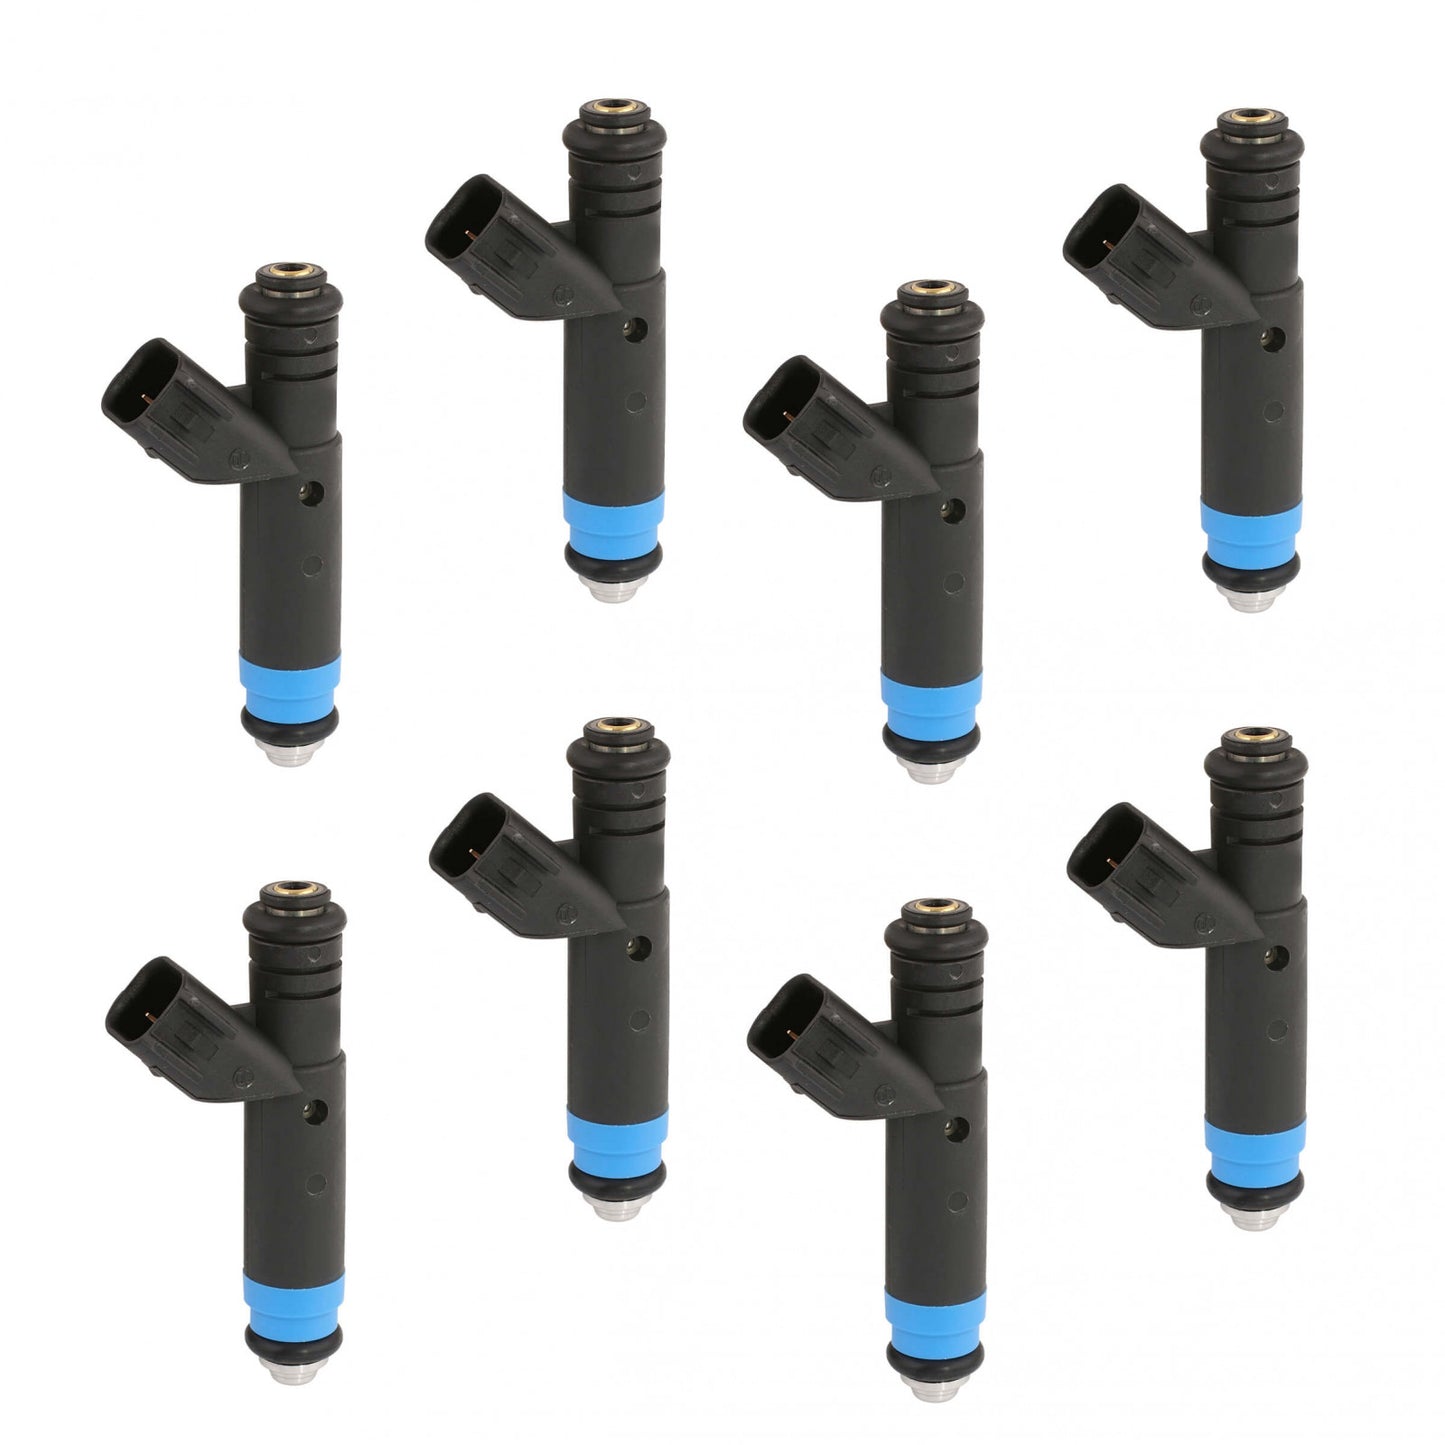 ACCEL Fuel Injector - 80 lb/hr - USCAR - High Impedance - 8 Pack 151880